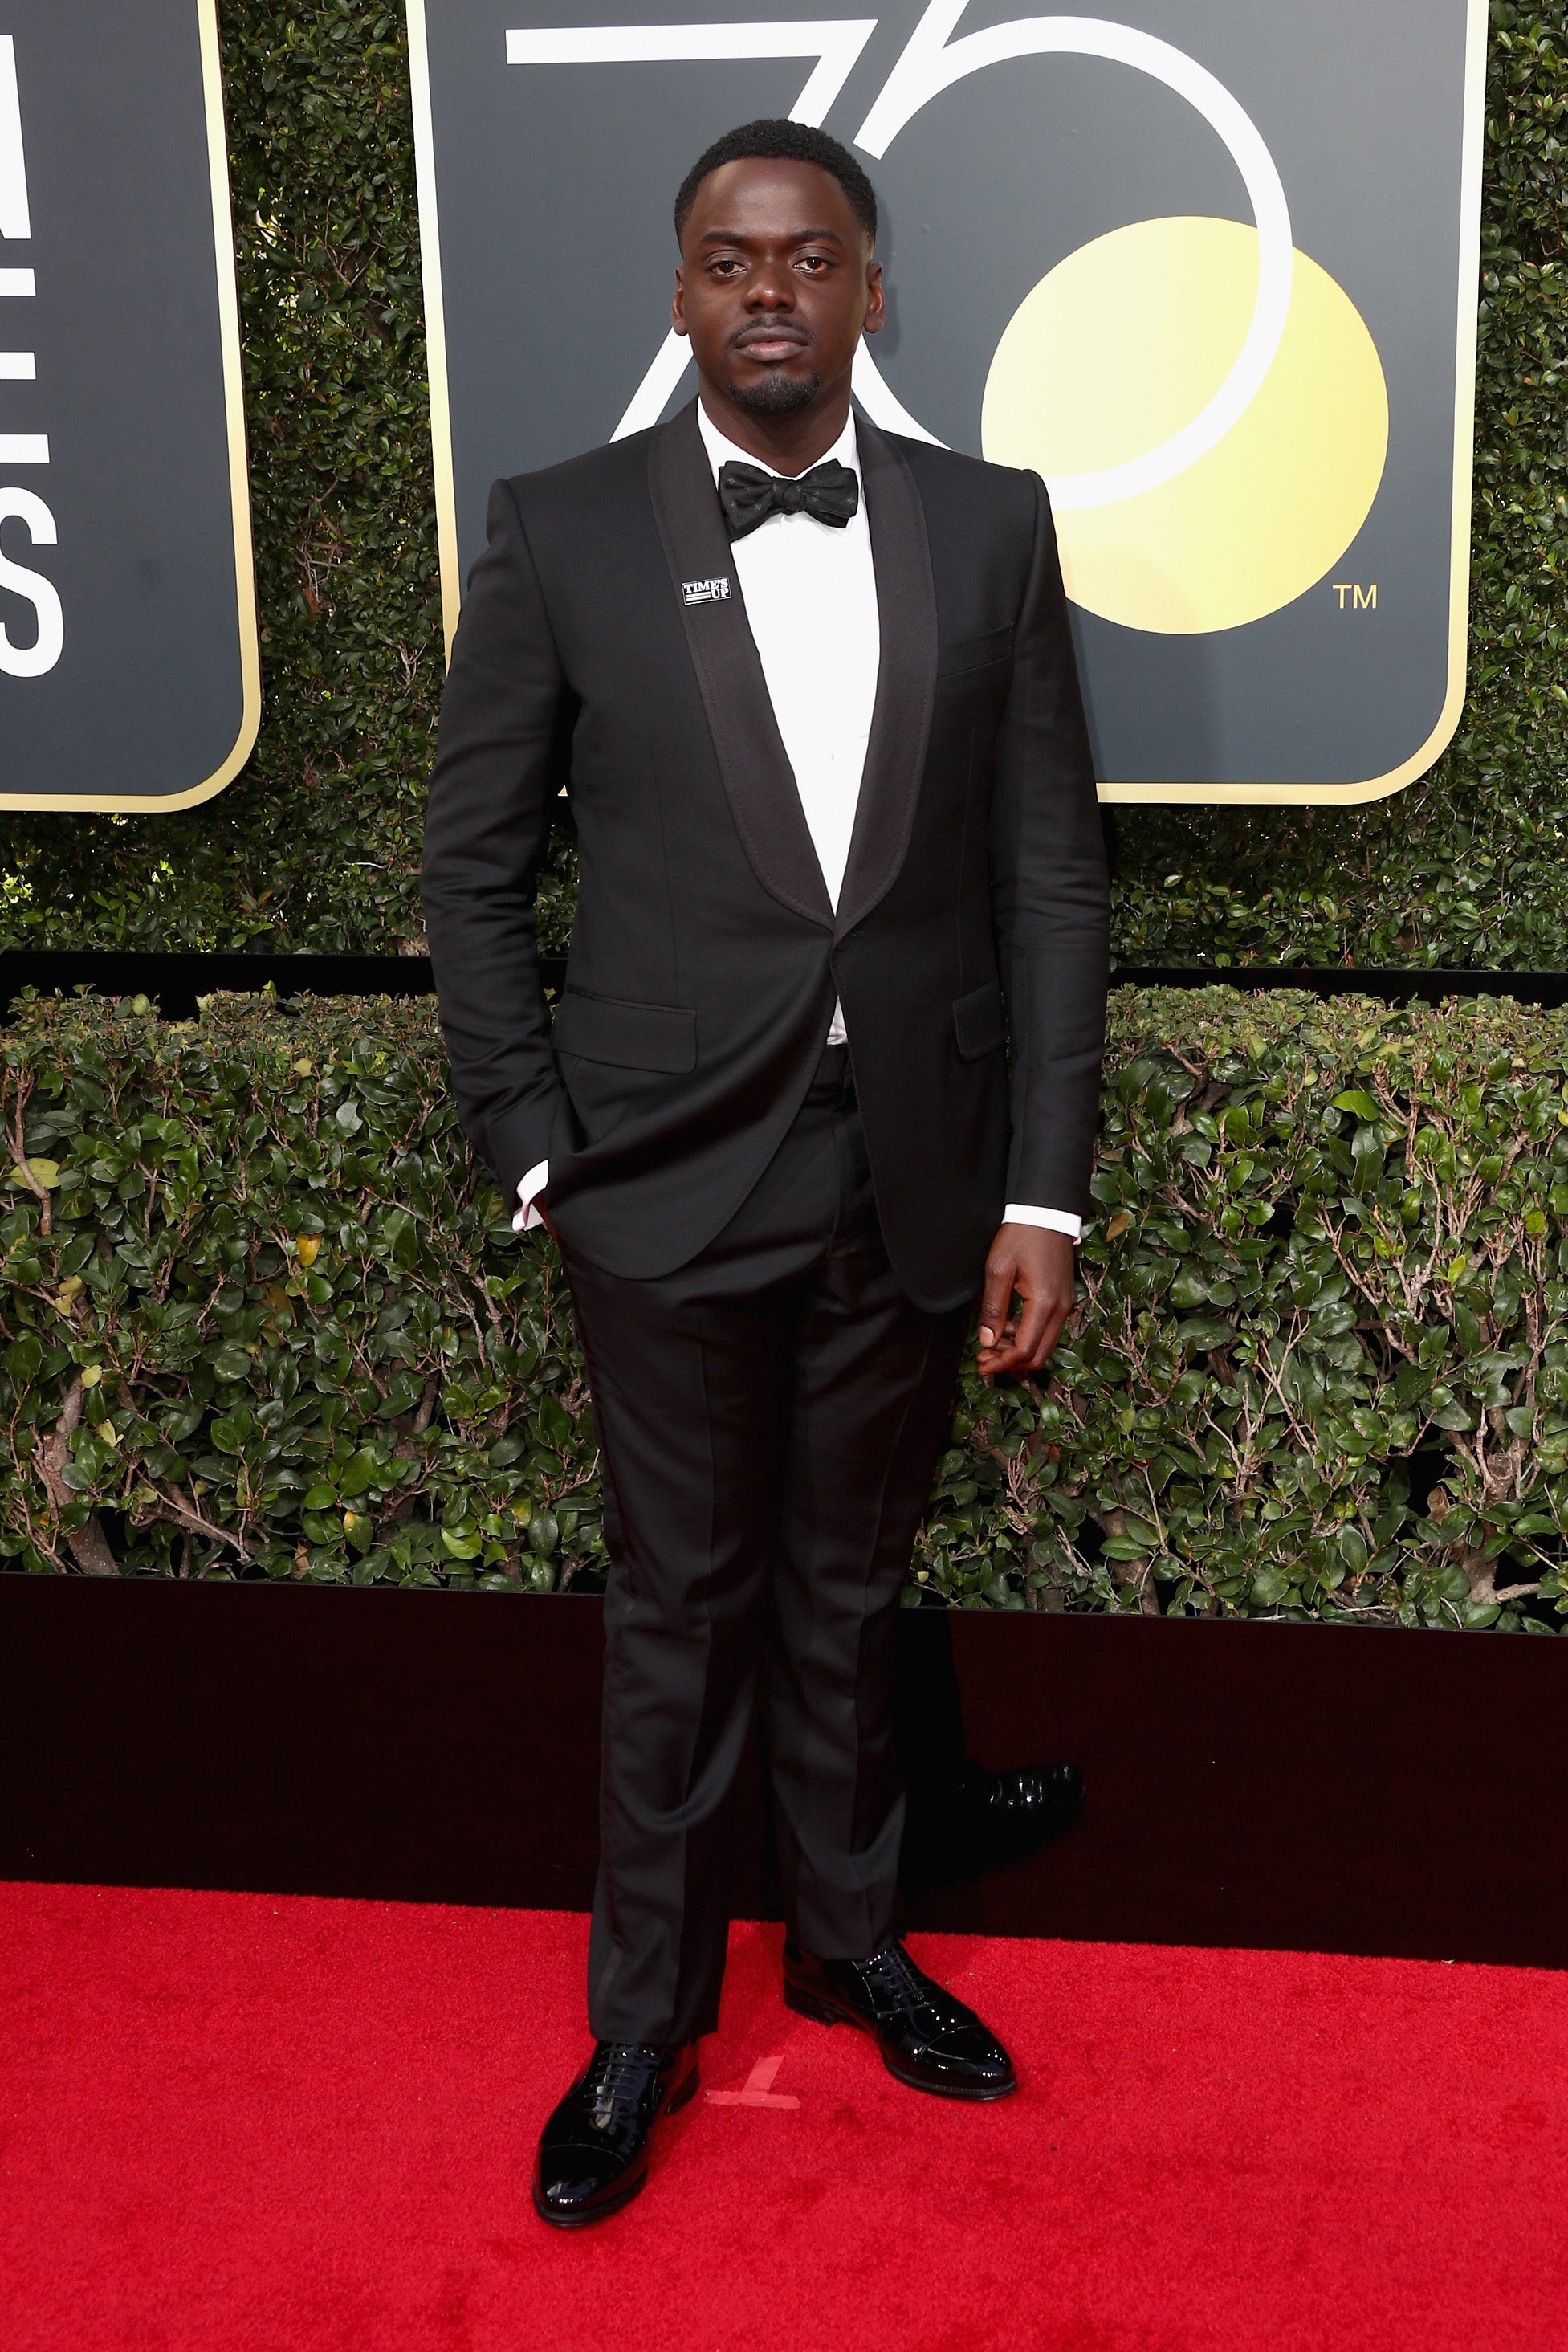 The Golden Globes Red Carpet Was All Black And Totally Beautiful
